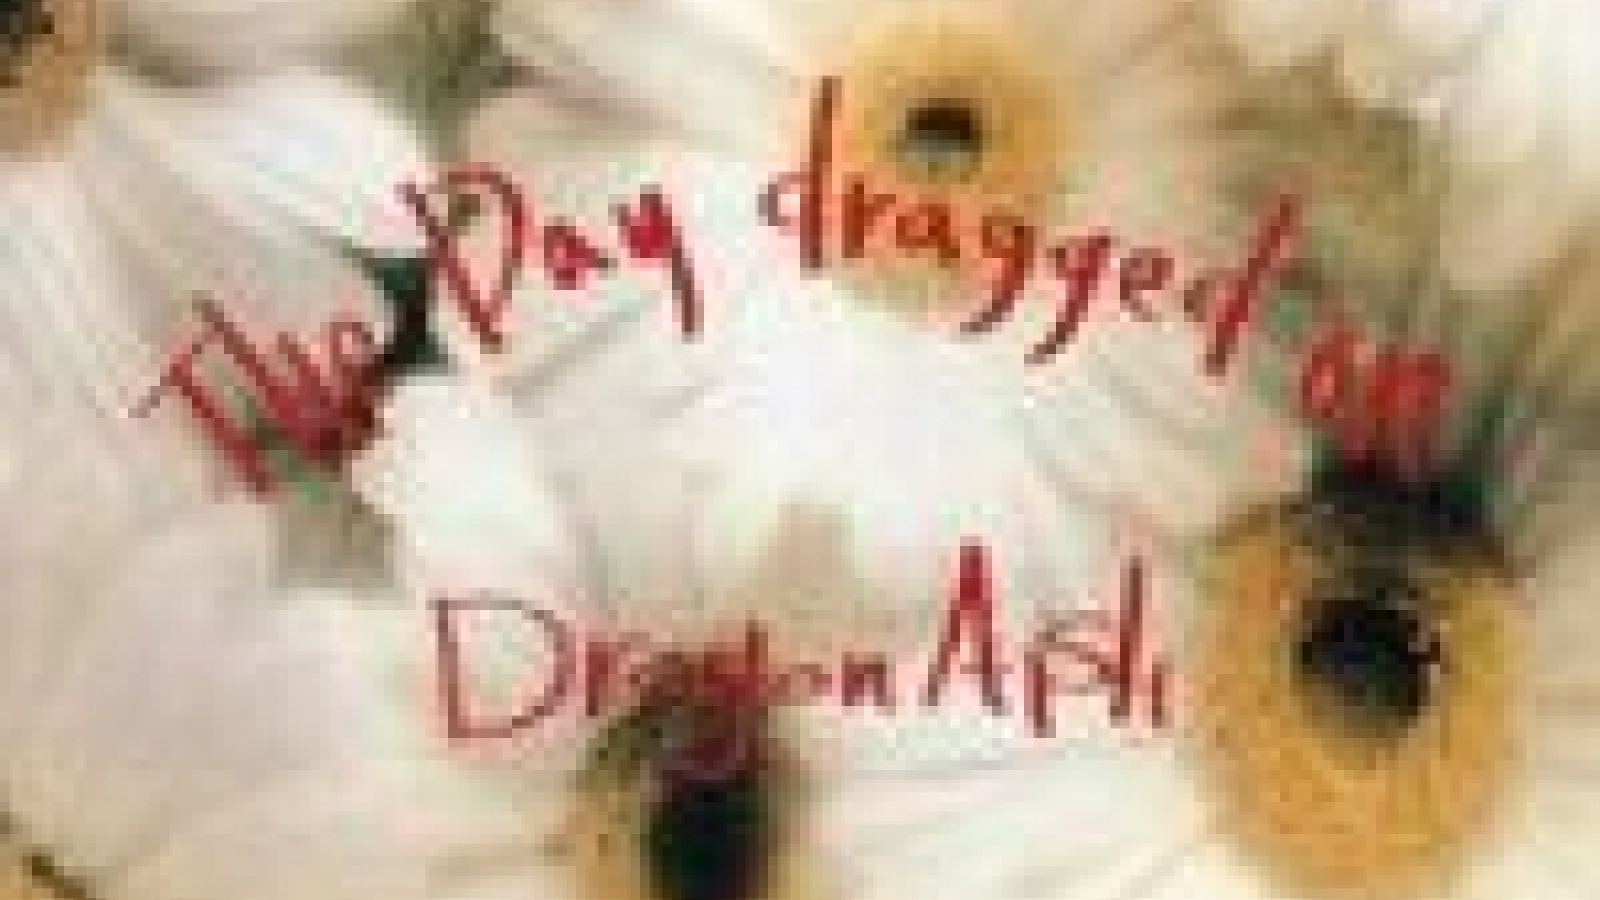 Dragon Ash - The Day dragged on © Dragon Ash. All rights reserved.